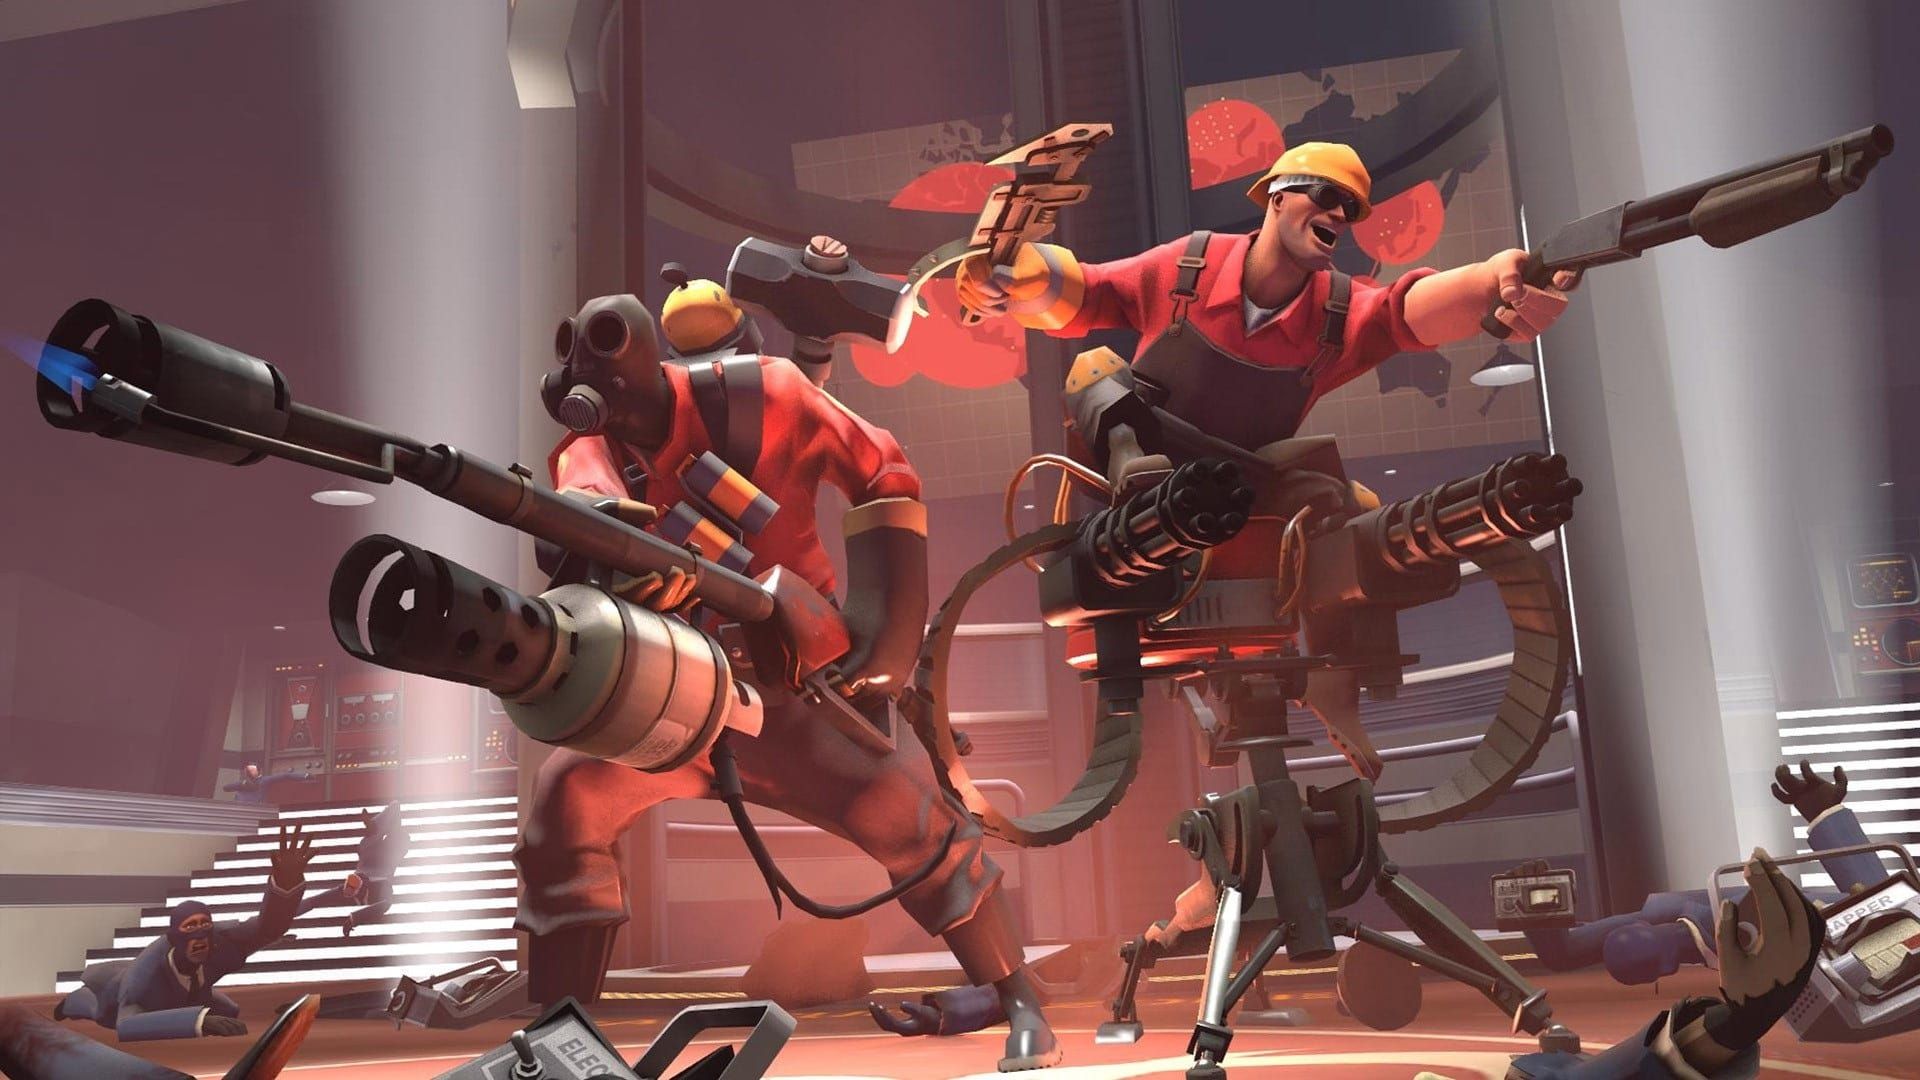 Team Fortress 2 Banner